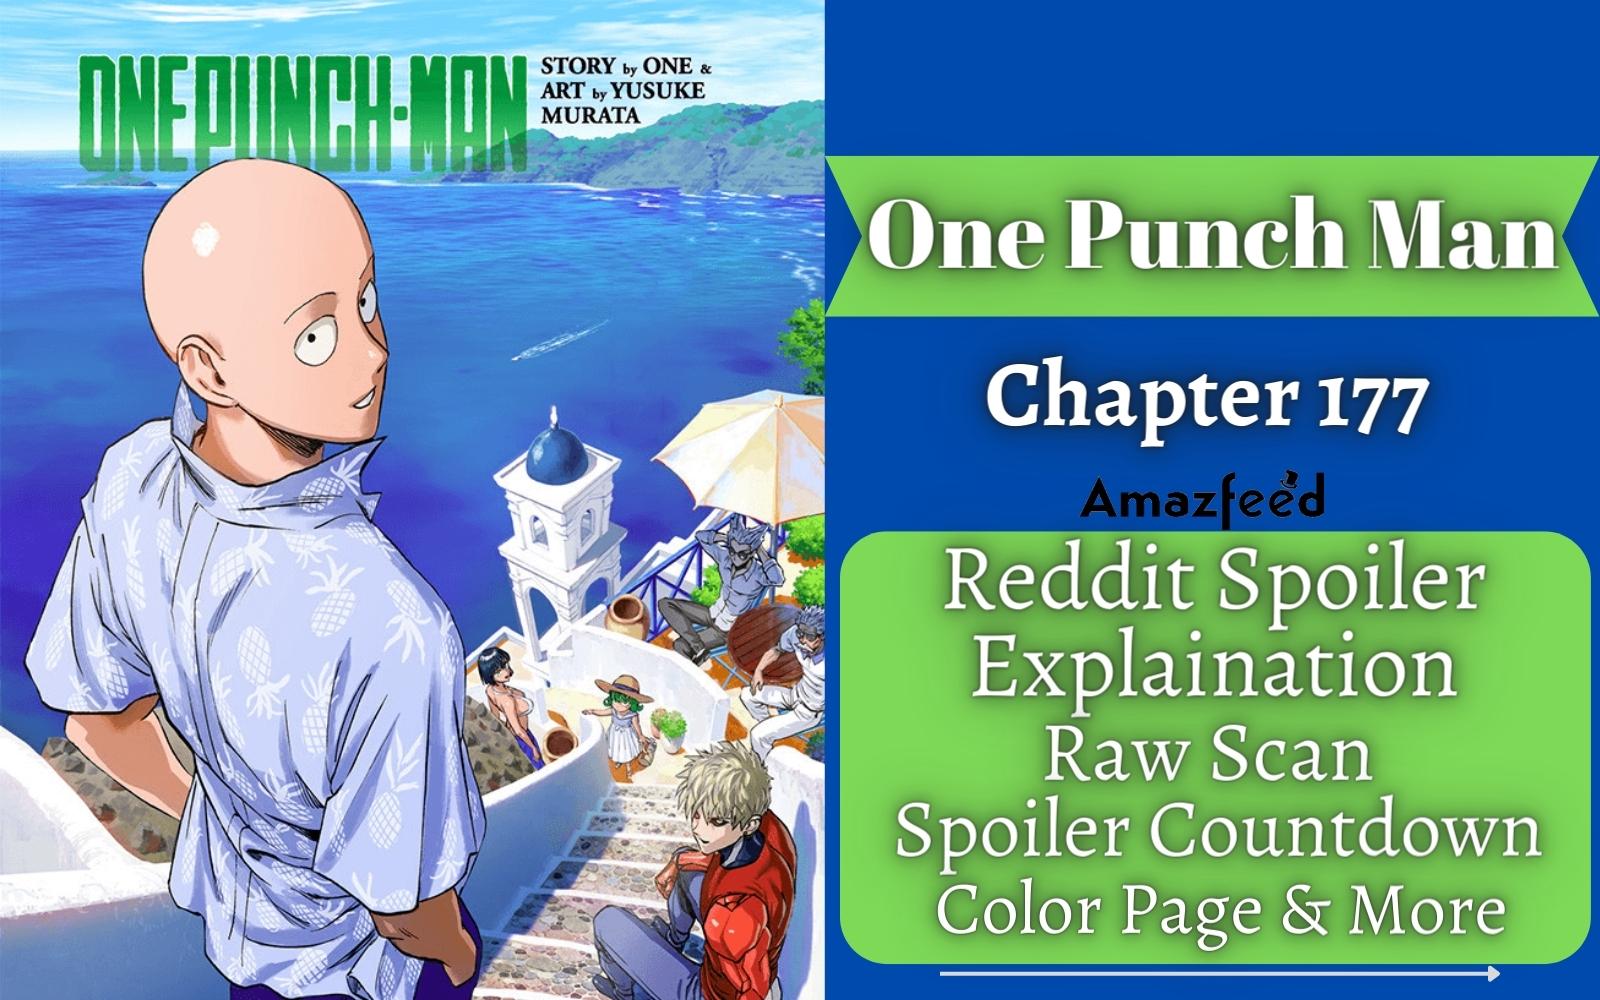 One Punch Man Chapter 177 Reddit Spoiler, Raw Scan Release Date, Shonen Jump Release Date, Color Page & More